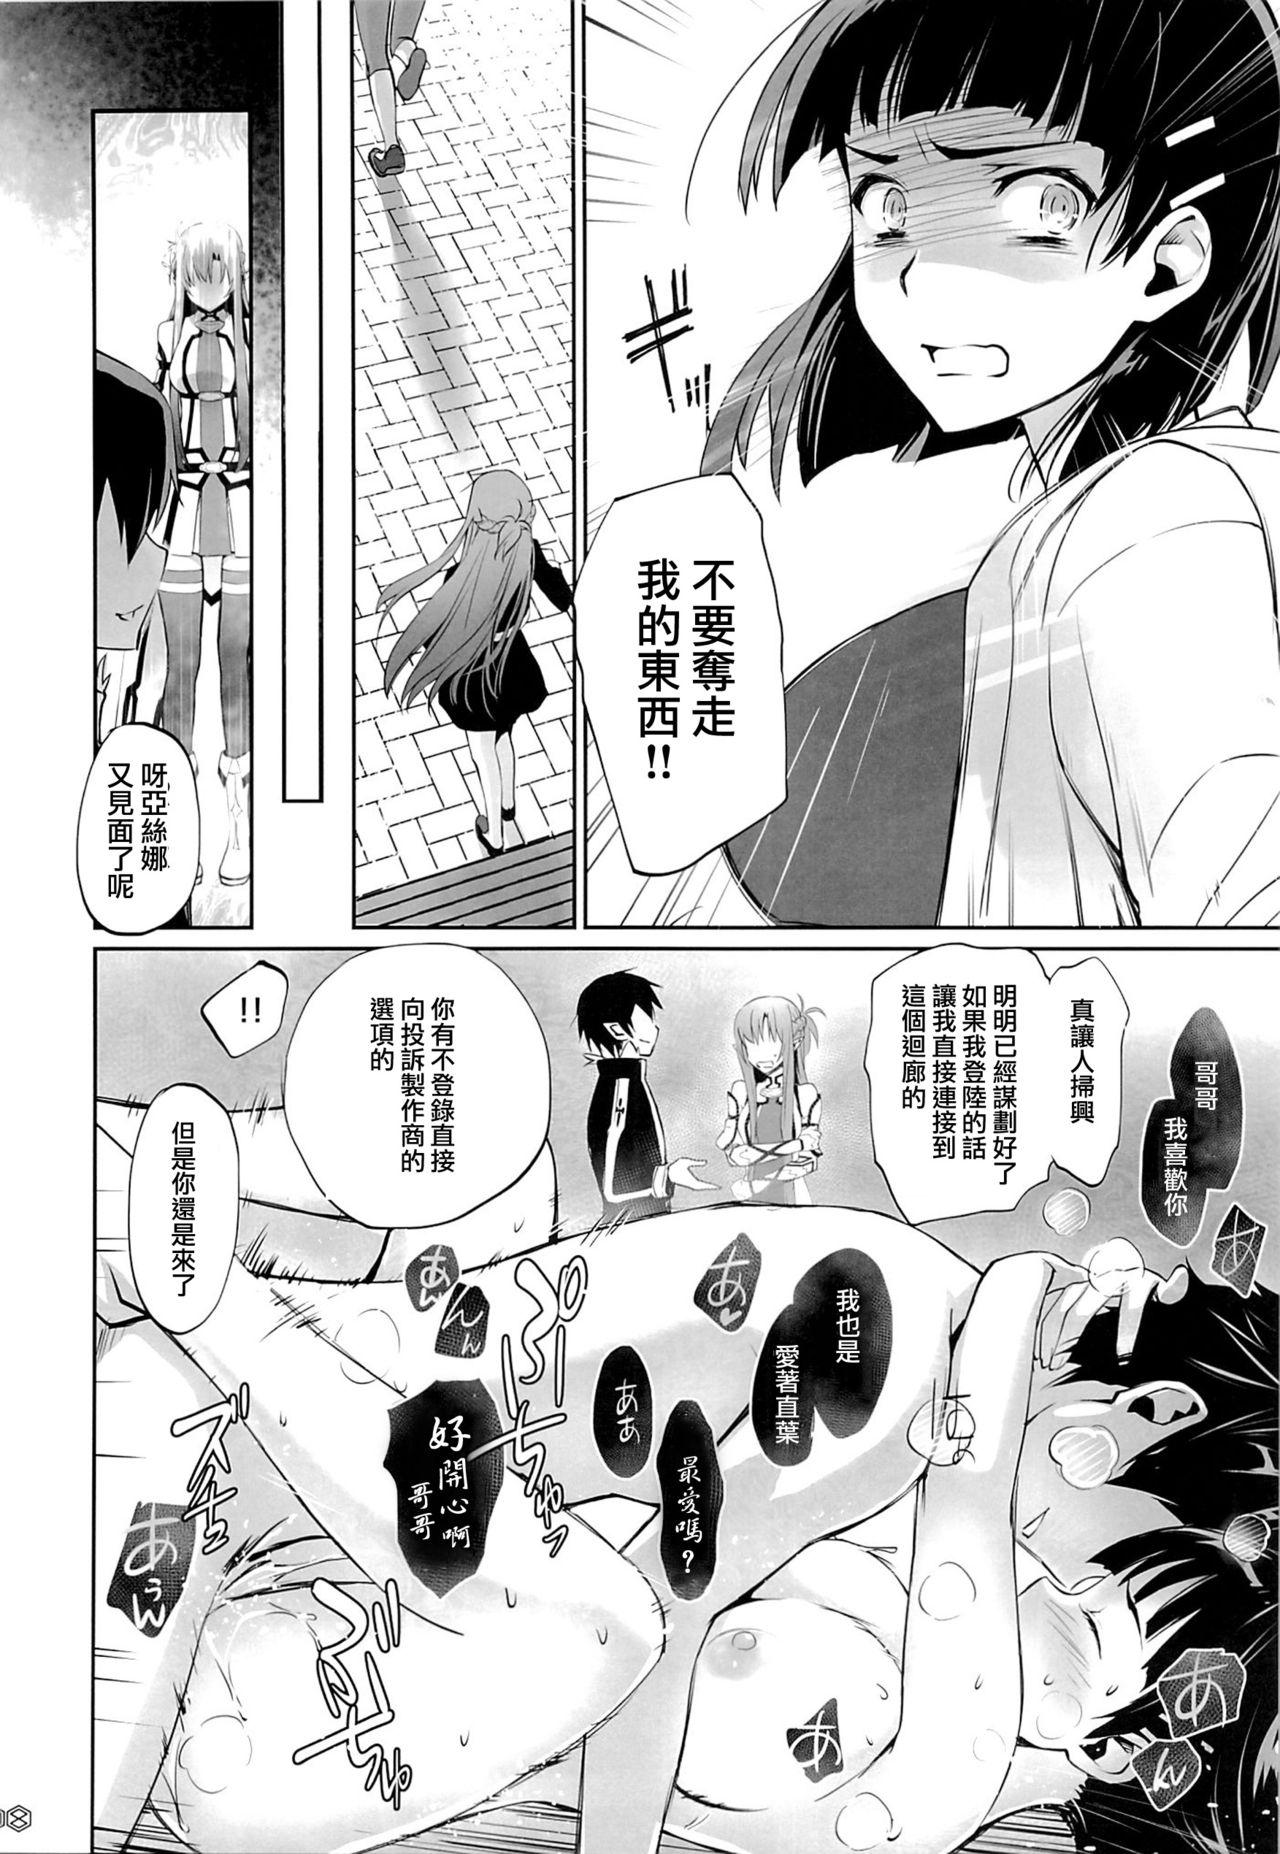 Oldvsyoung turnover - Sword art online Web Cam - Page 7